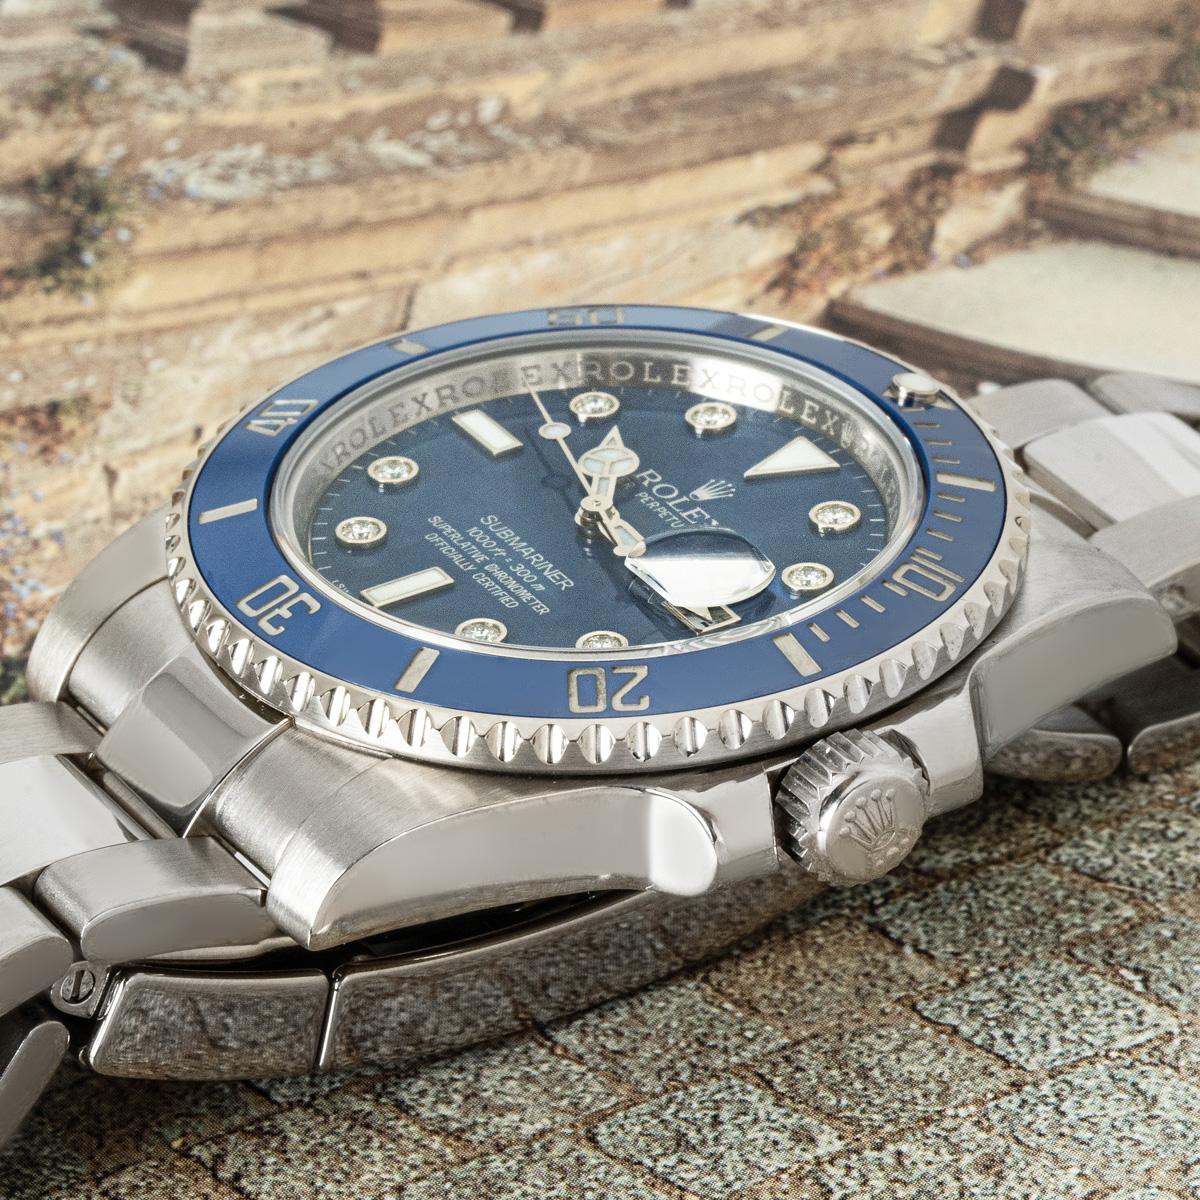 A white gold 40mm Submariner Date Smurf by Rolex. Features a rare blue dial with diamond set hour markers, complemented by a blue ceramic unidirectional rotatable bezel with 60-minute graduations. The Oyster bracelet is equipped with an Oysterlock